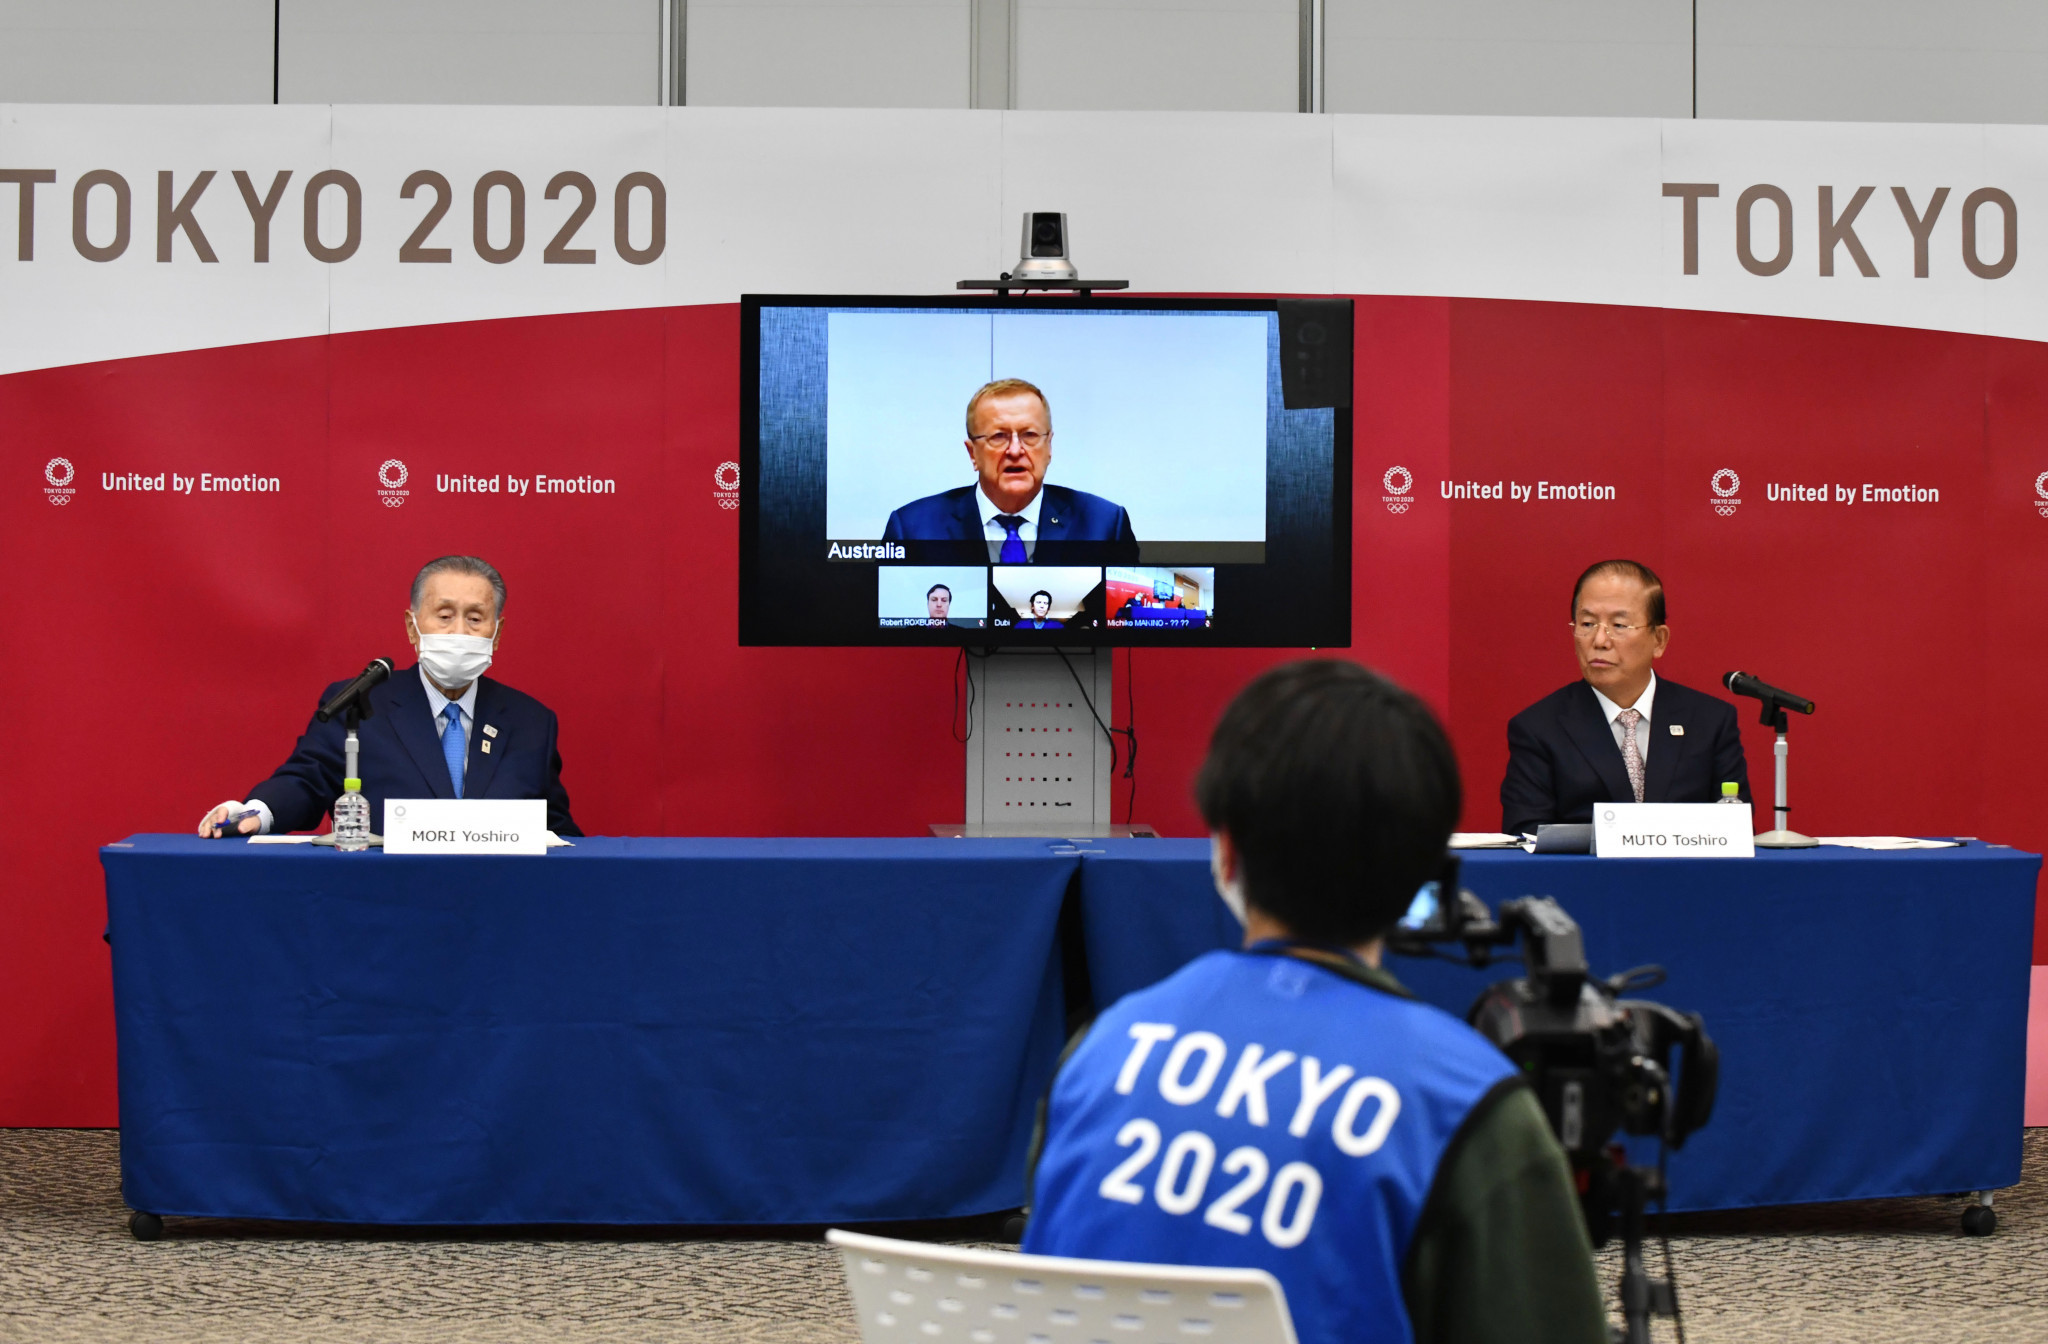 John Coates claimed Tokyo 2020 can act as an economic stimulus ©Getty Images